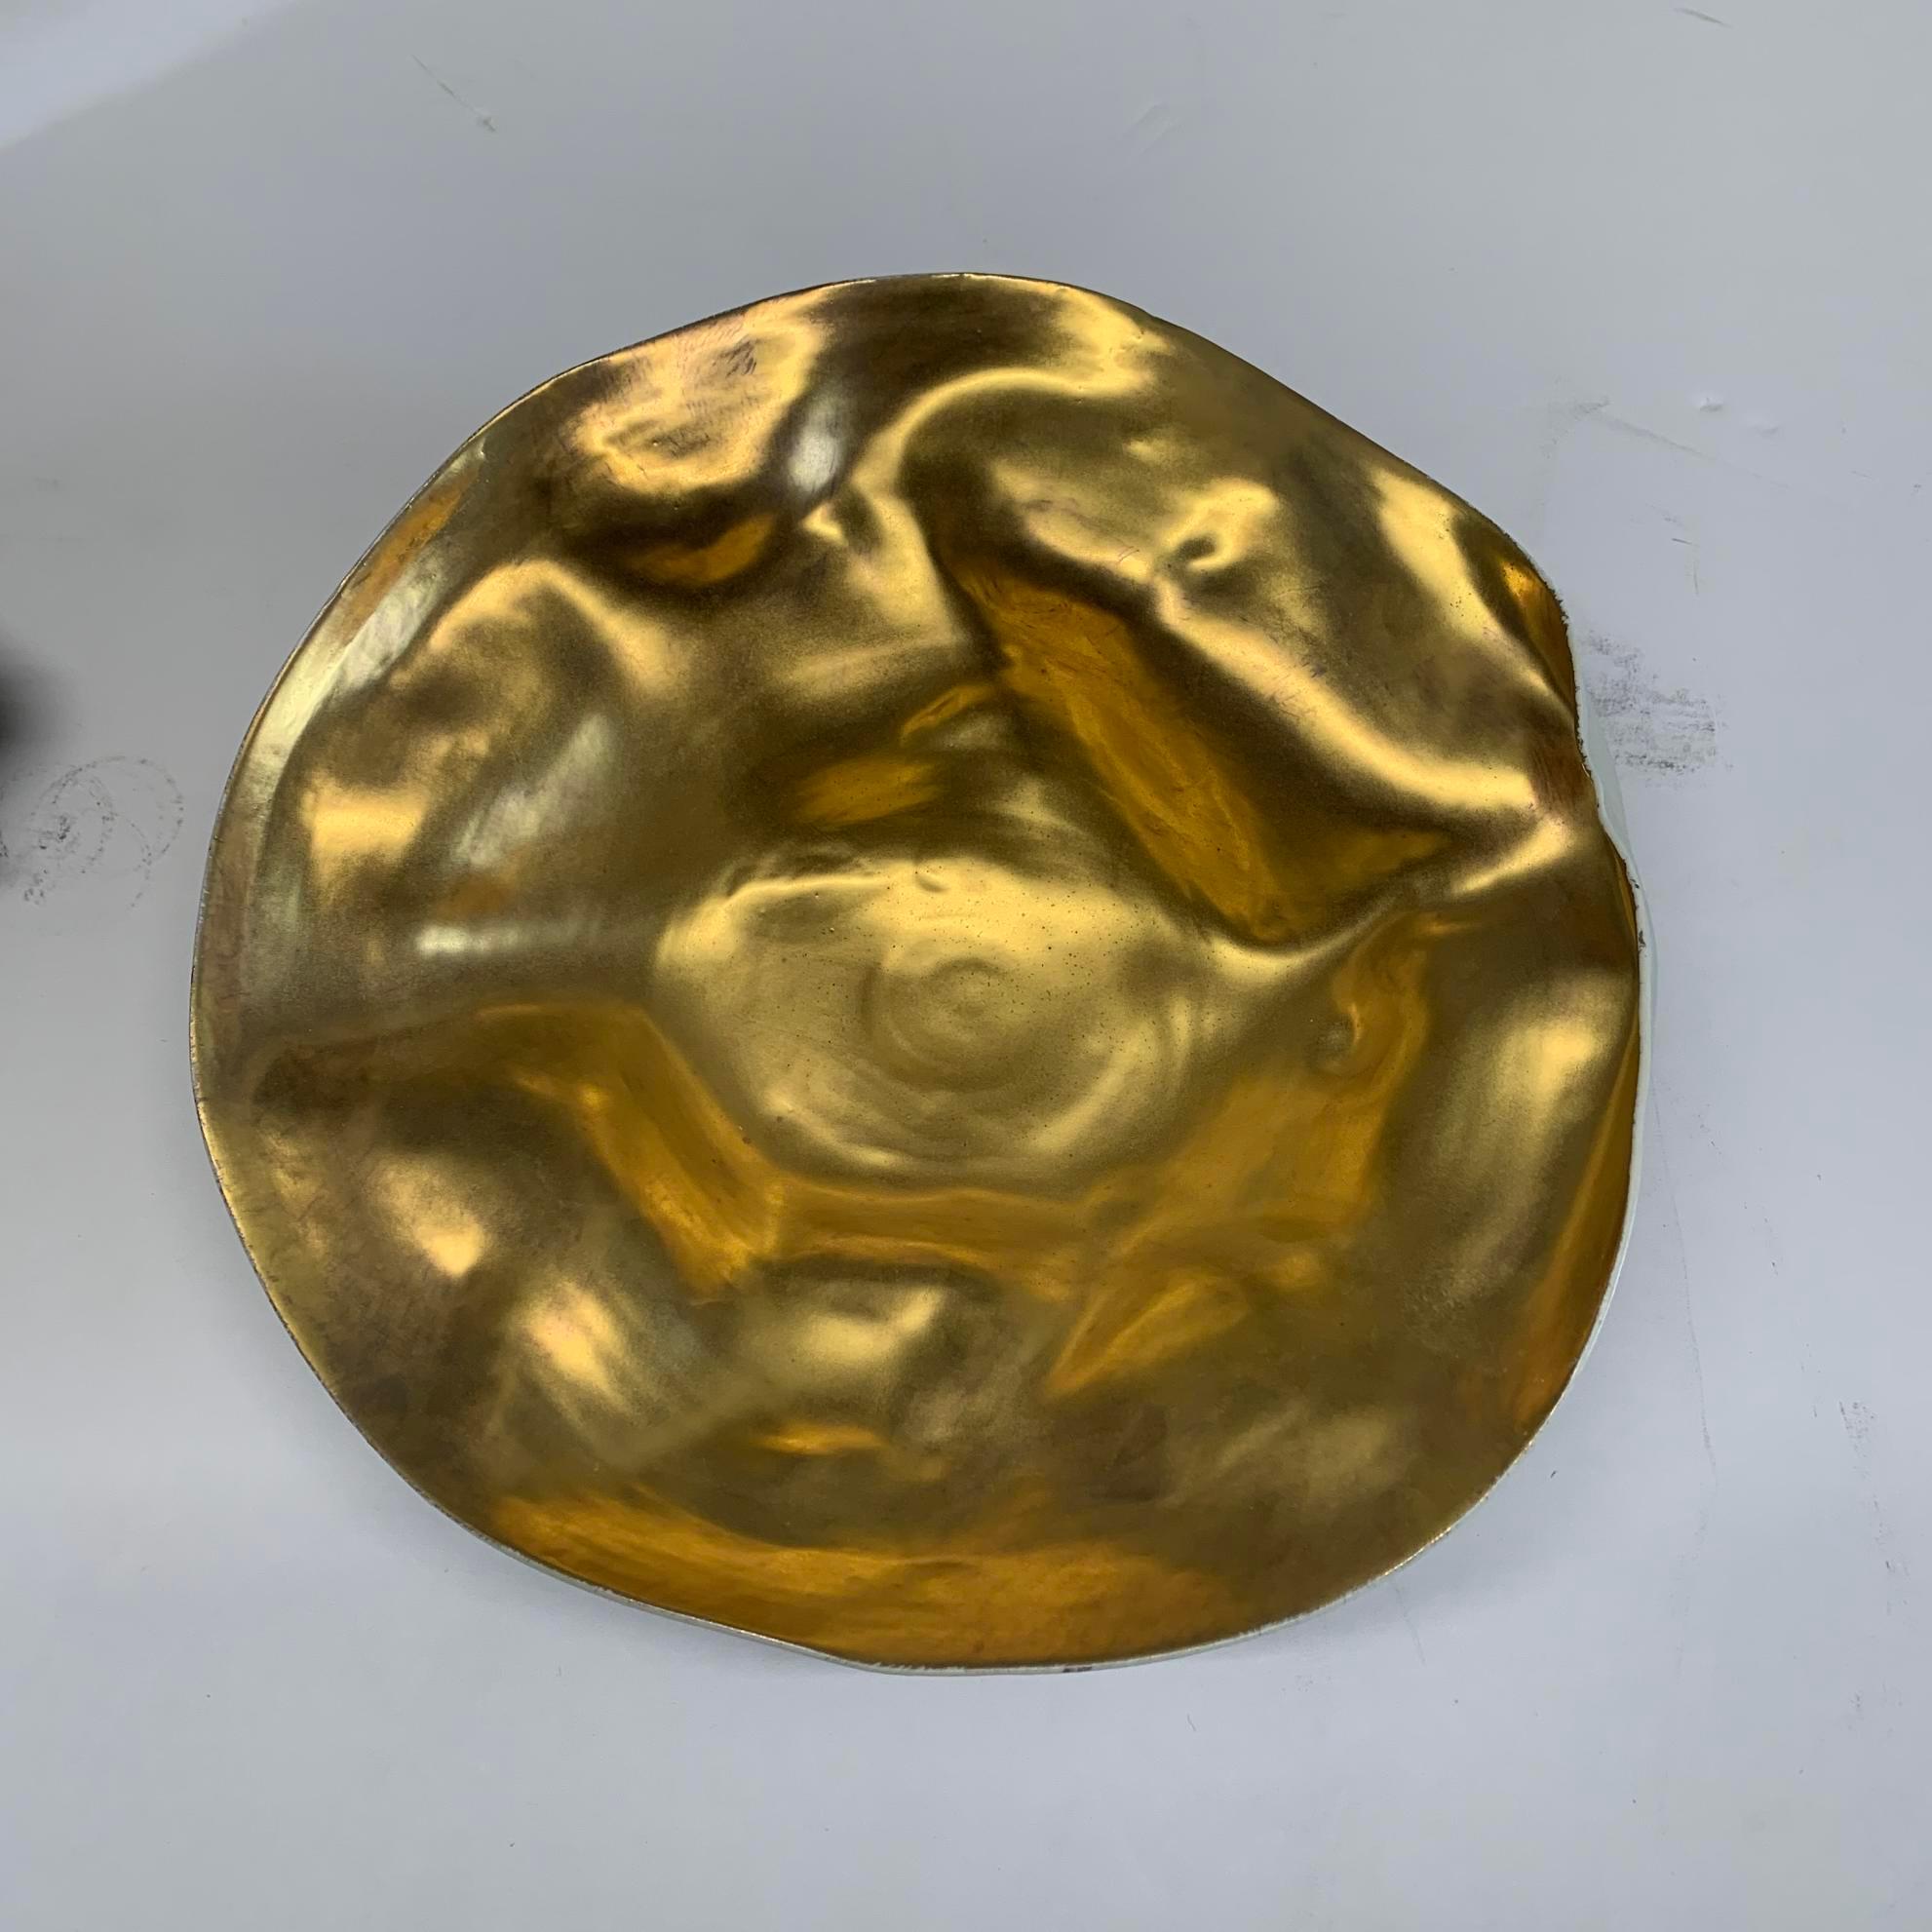 Contemporary Italian handmade large porcelain gold bowl
18K gold
Organic free form design.
Medium size also available (S5398)
Also available in three sizes in silver (S4281/4282/4310)


 
 